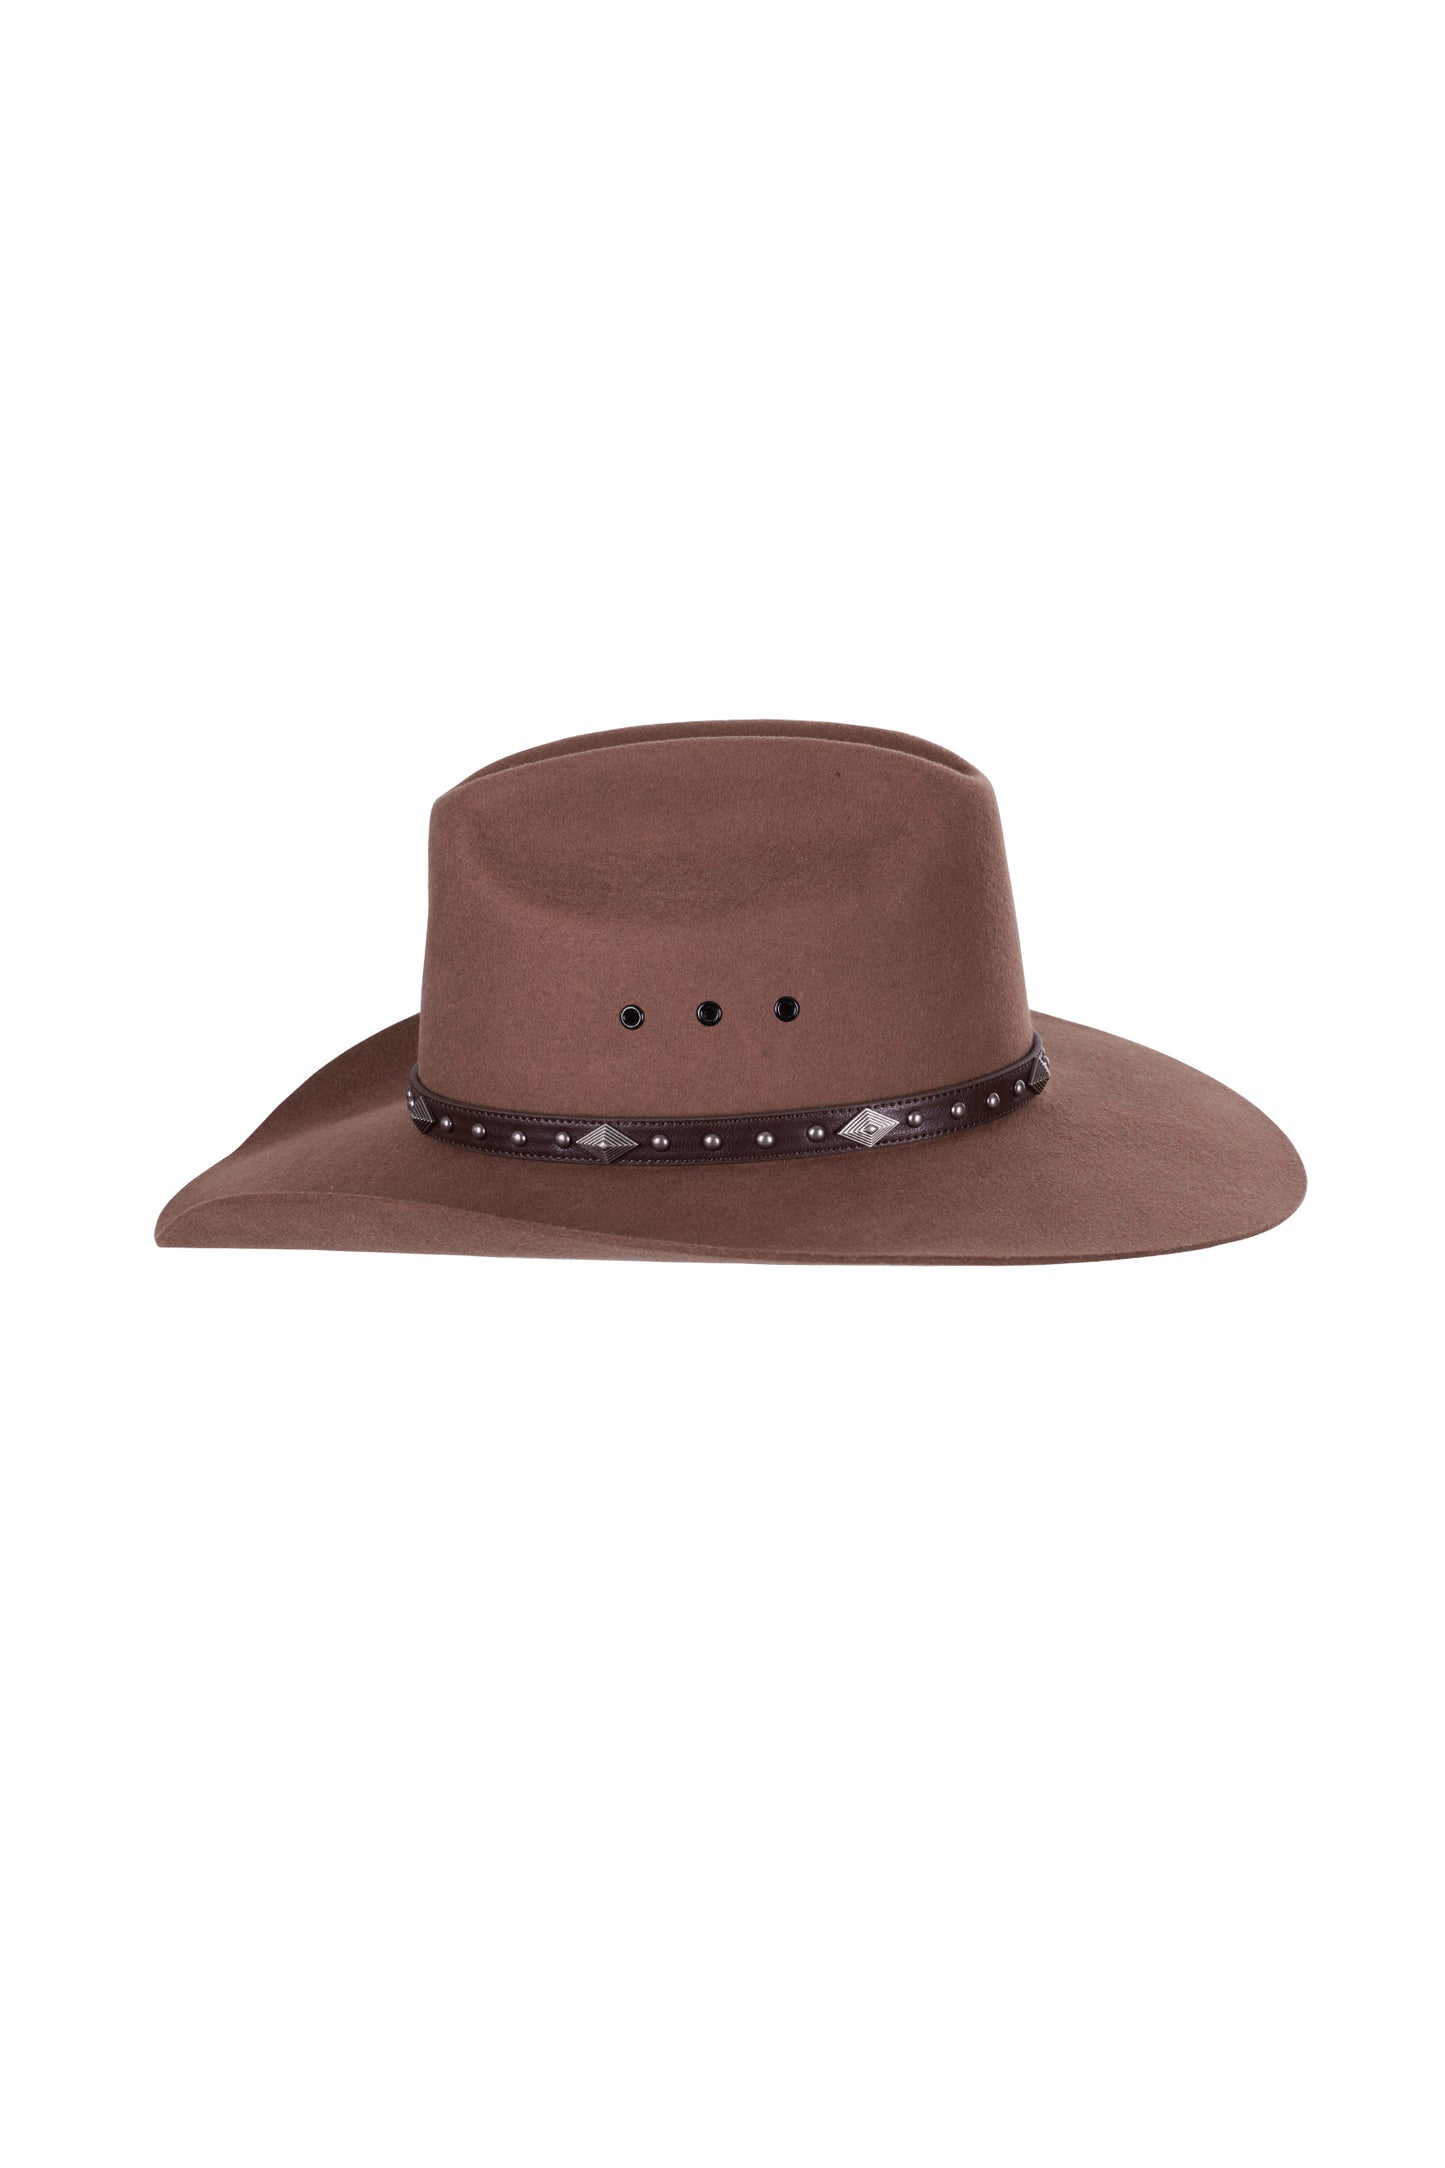 Pure Western Toby Hat Band - Chocolate - P4W2920BND